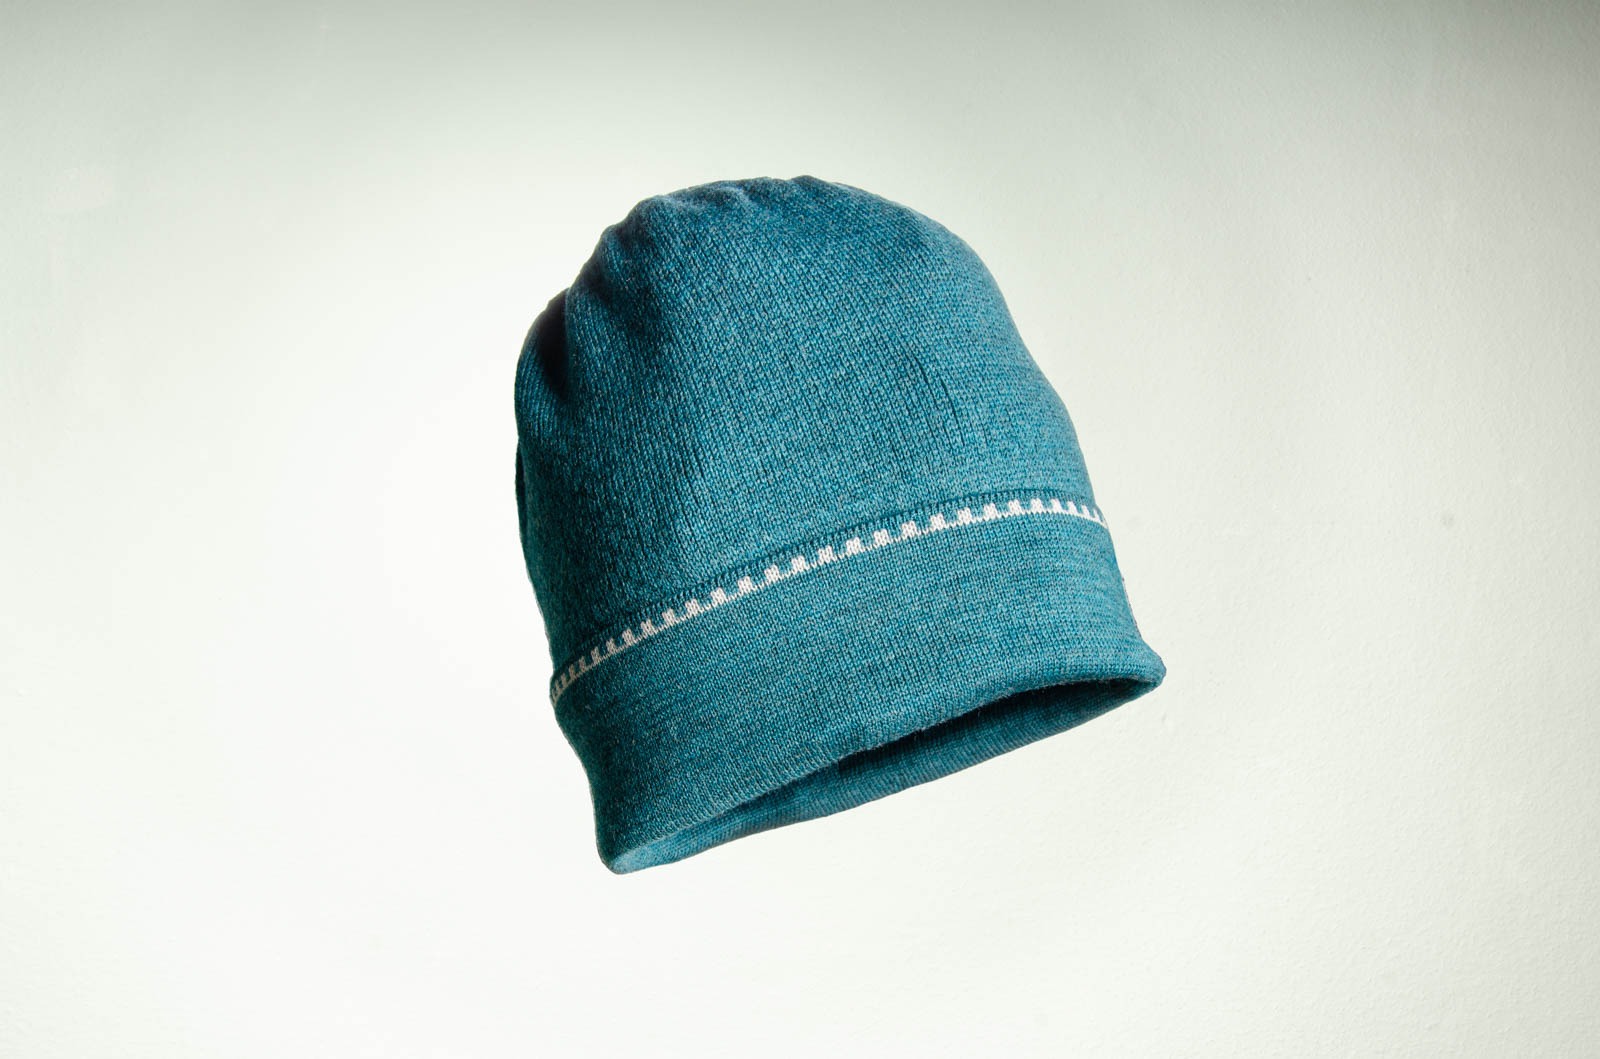 Merino sun stole, hat and wrist warmers in turquoise and silver 10